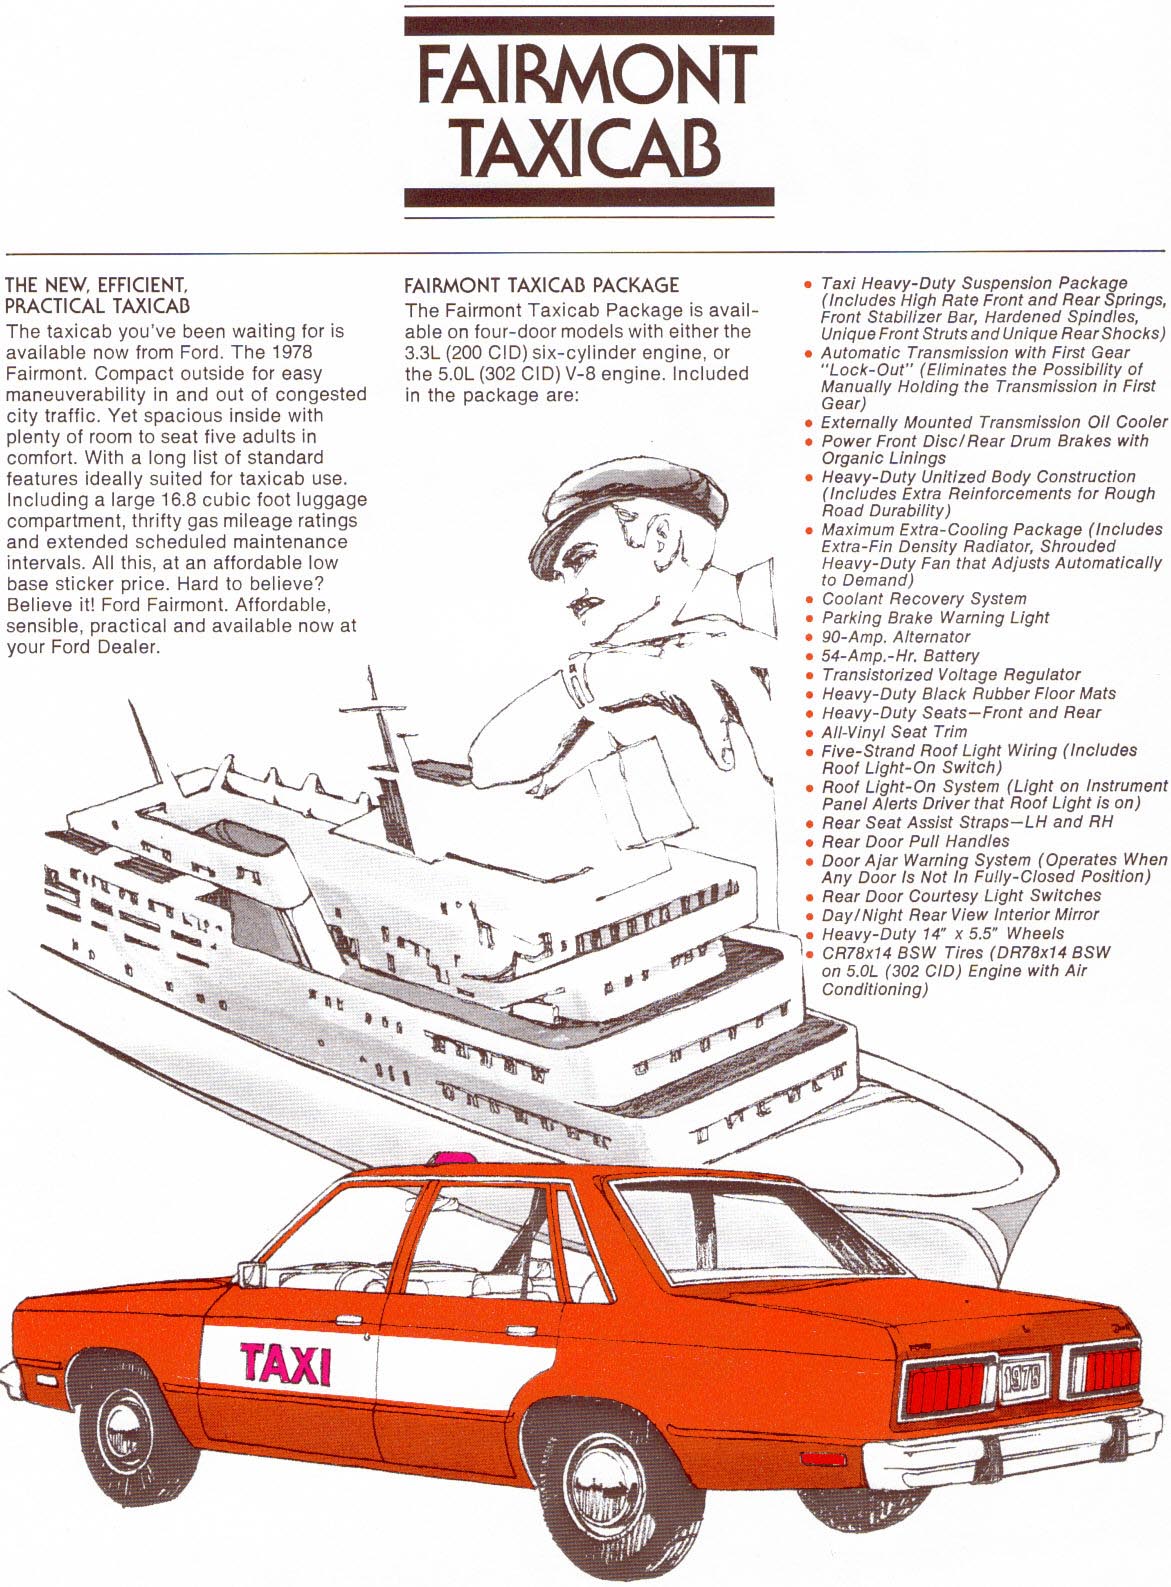 1978 Ford Fairmont Taxicab Folder Page 4